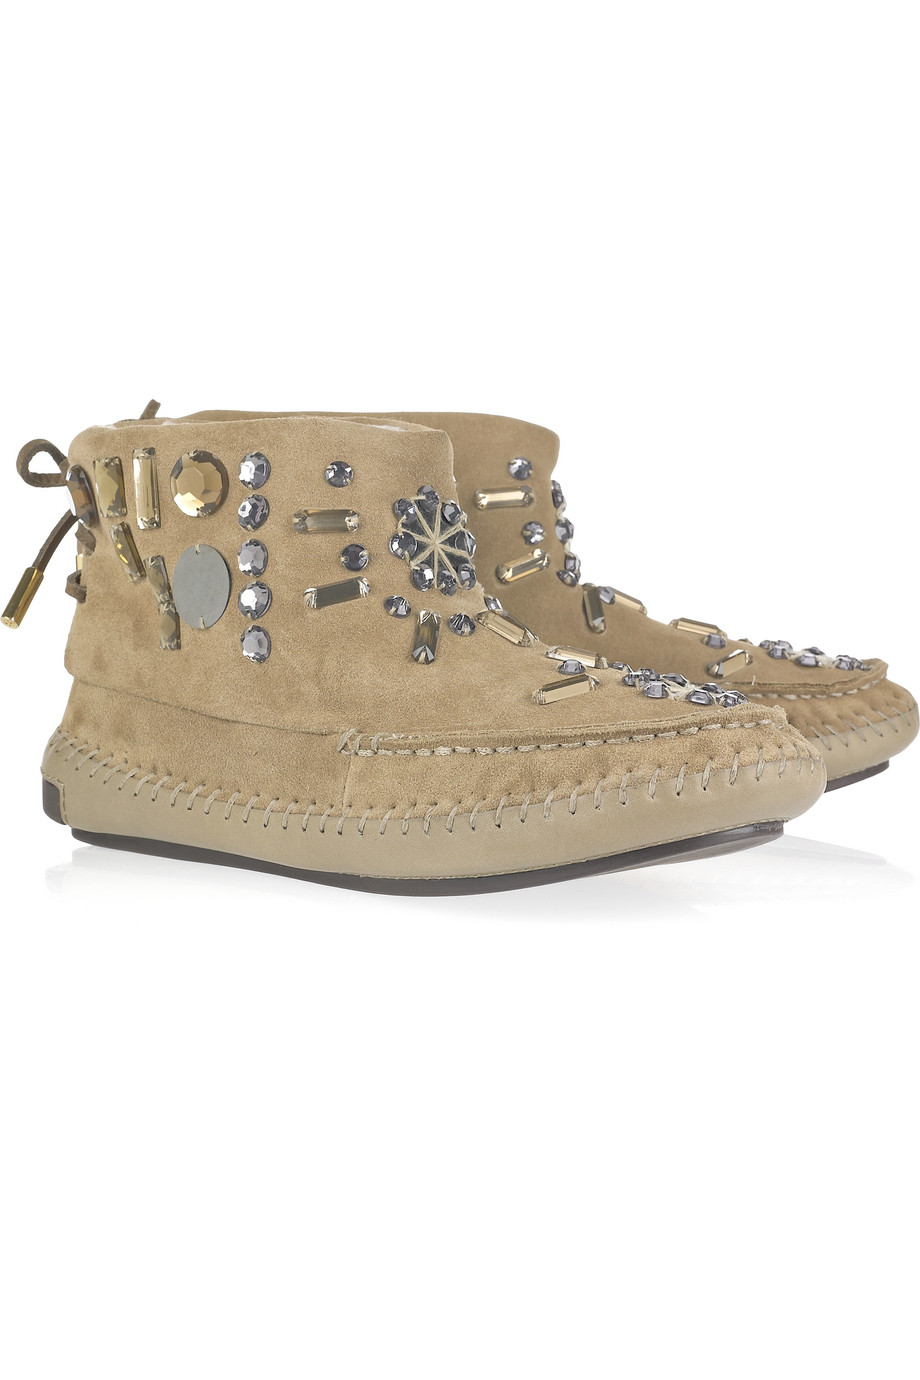 Lyst - Tory Burch Embellished Suede Moccasin Boots in Natural